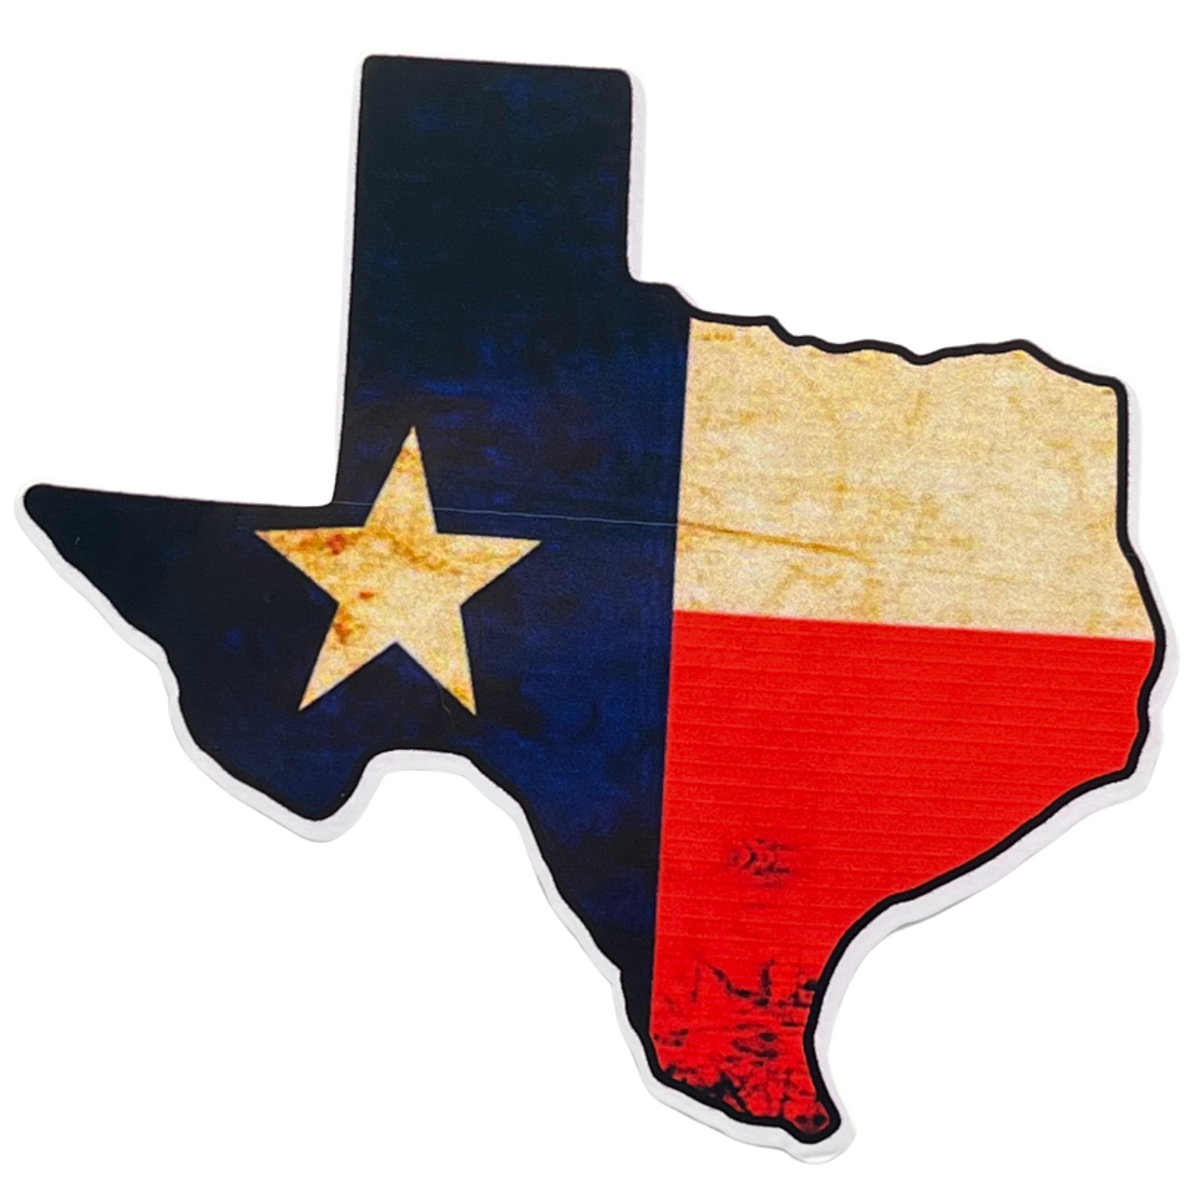 Texas Distressed Flag Sticker for Car Truck Window Decal TX State USA American